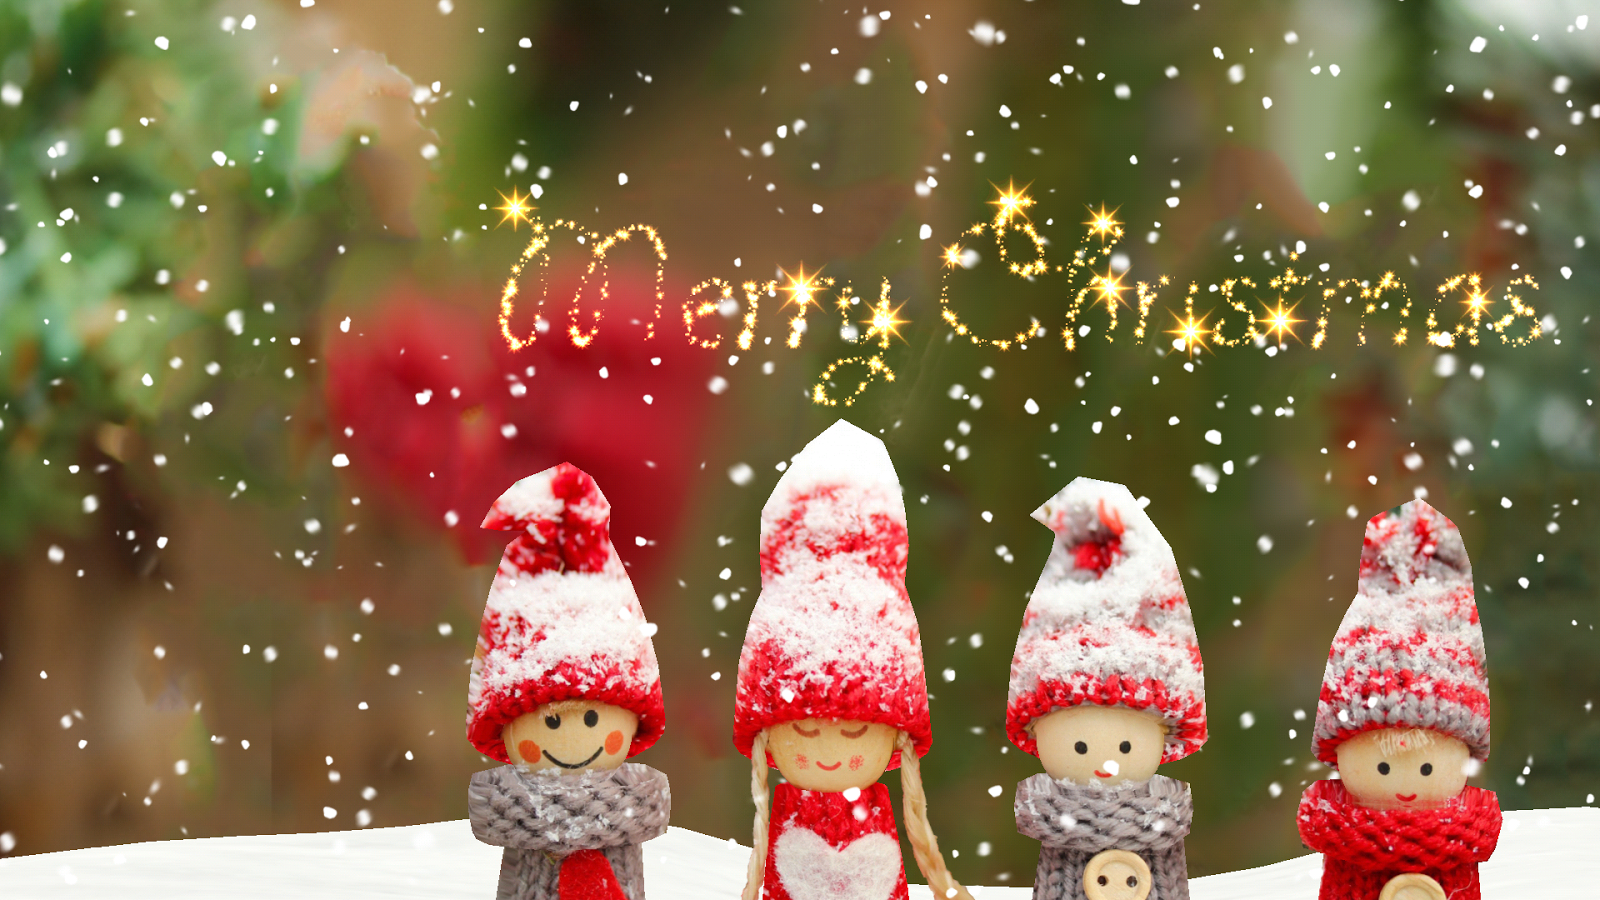 Live Wallpaper With Christmas Dolls And Animated Snow Greeting